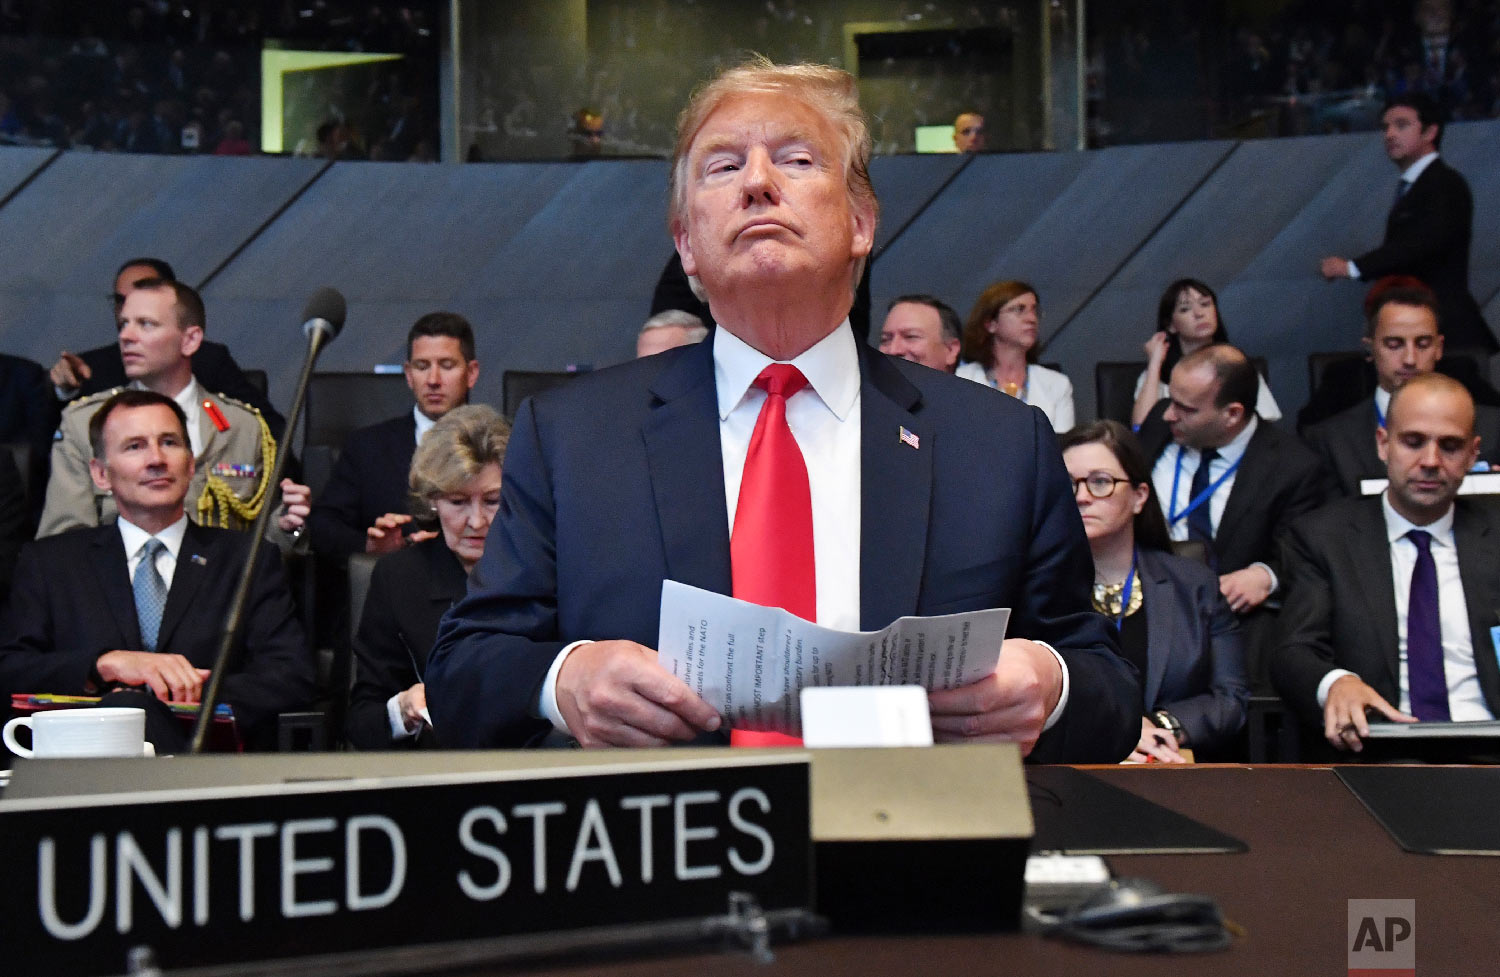  U.S. President Donald Trump attends a meeting of the North Atlantic Council during a summit of heads of state and government at NATO headquarters in Brussels on July 11, 2018. (AP Photo/Geert Vanden Wijngaert) 